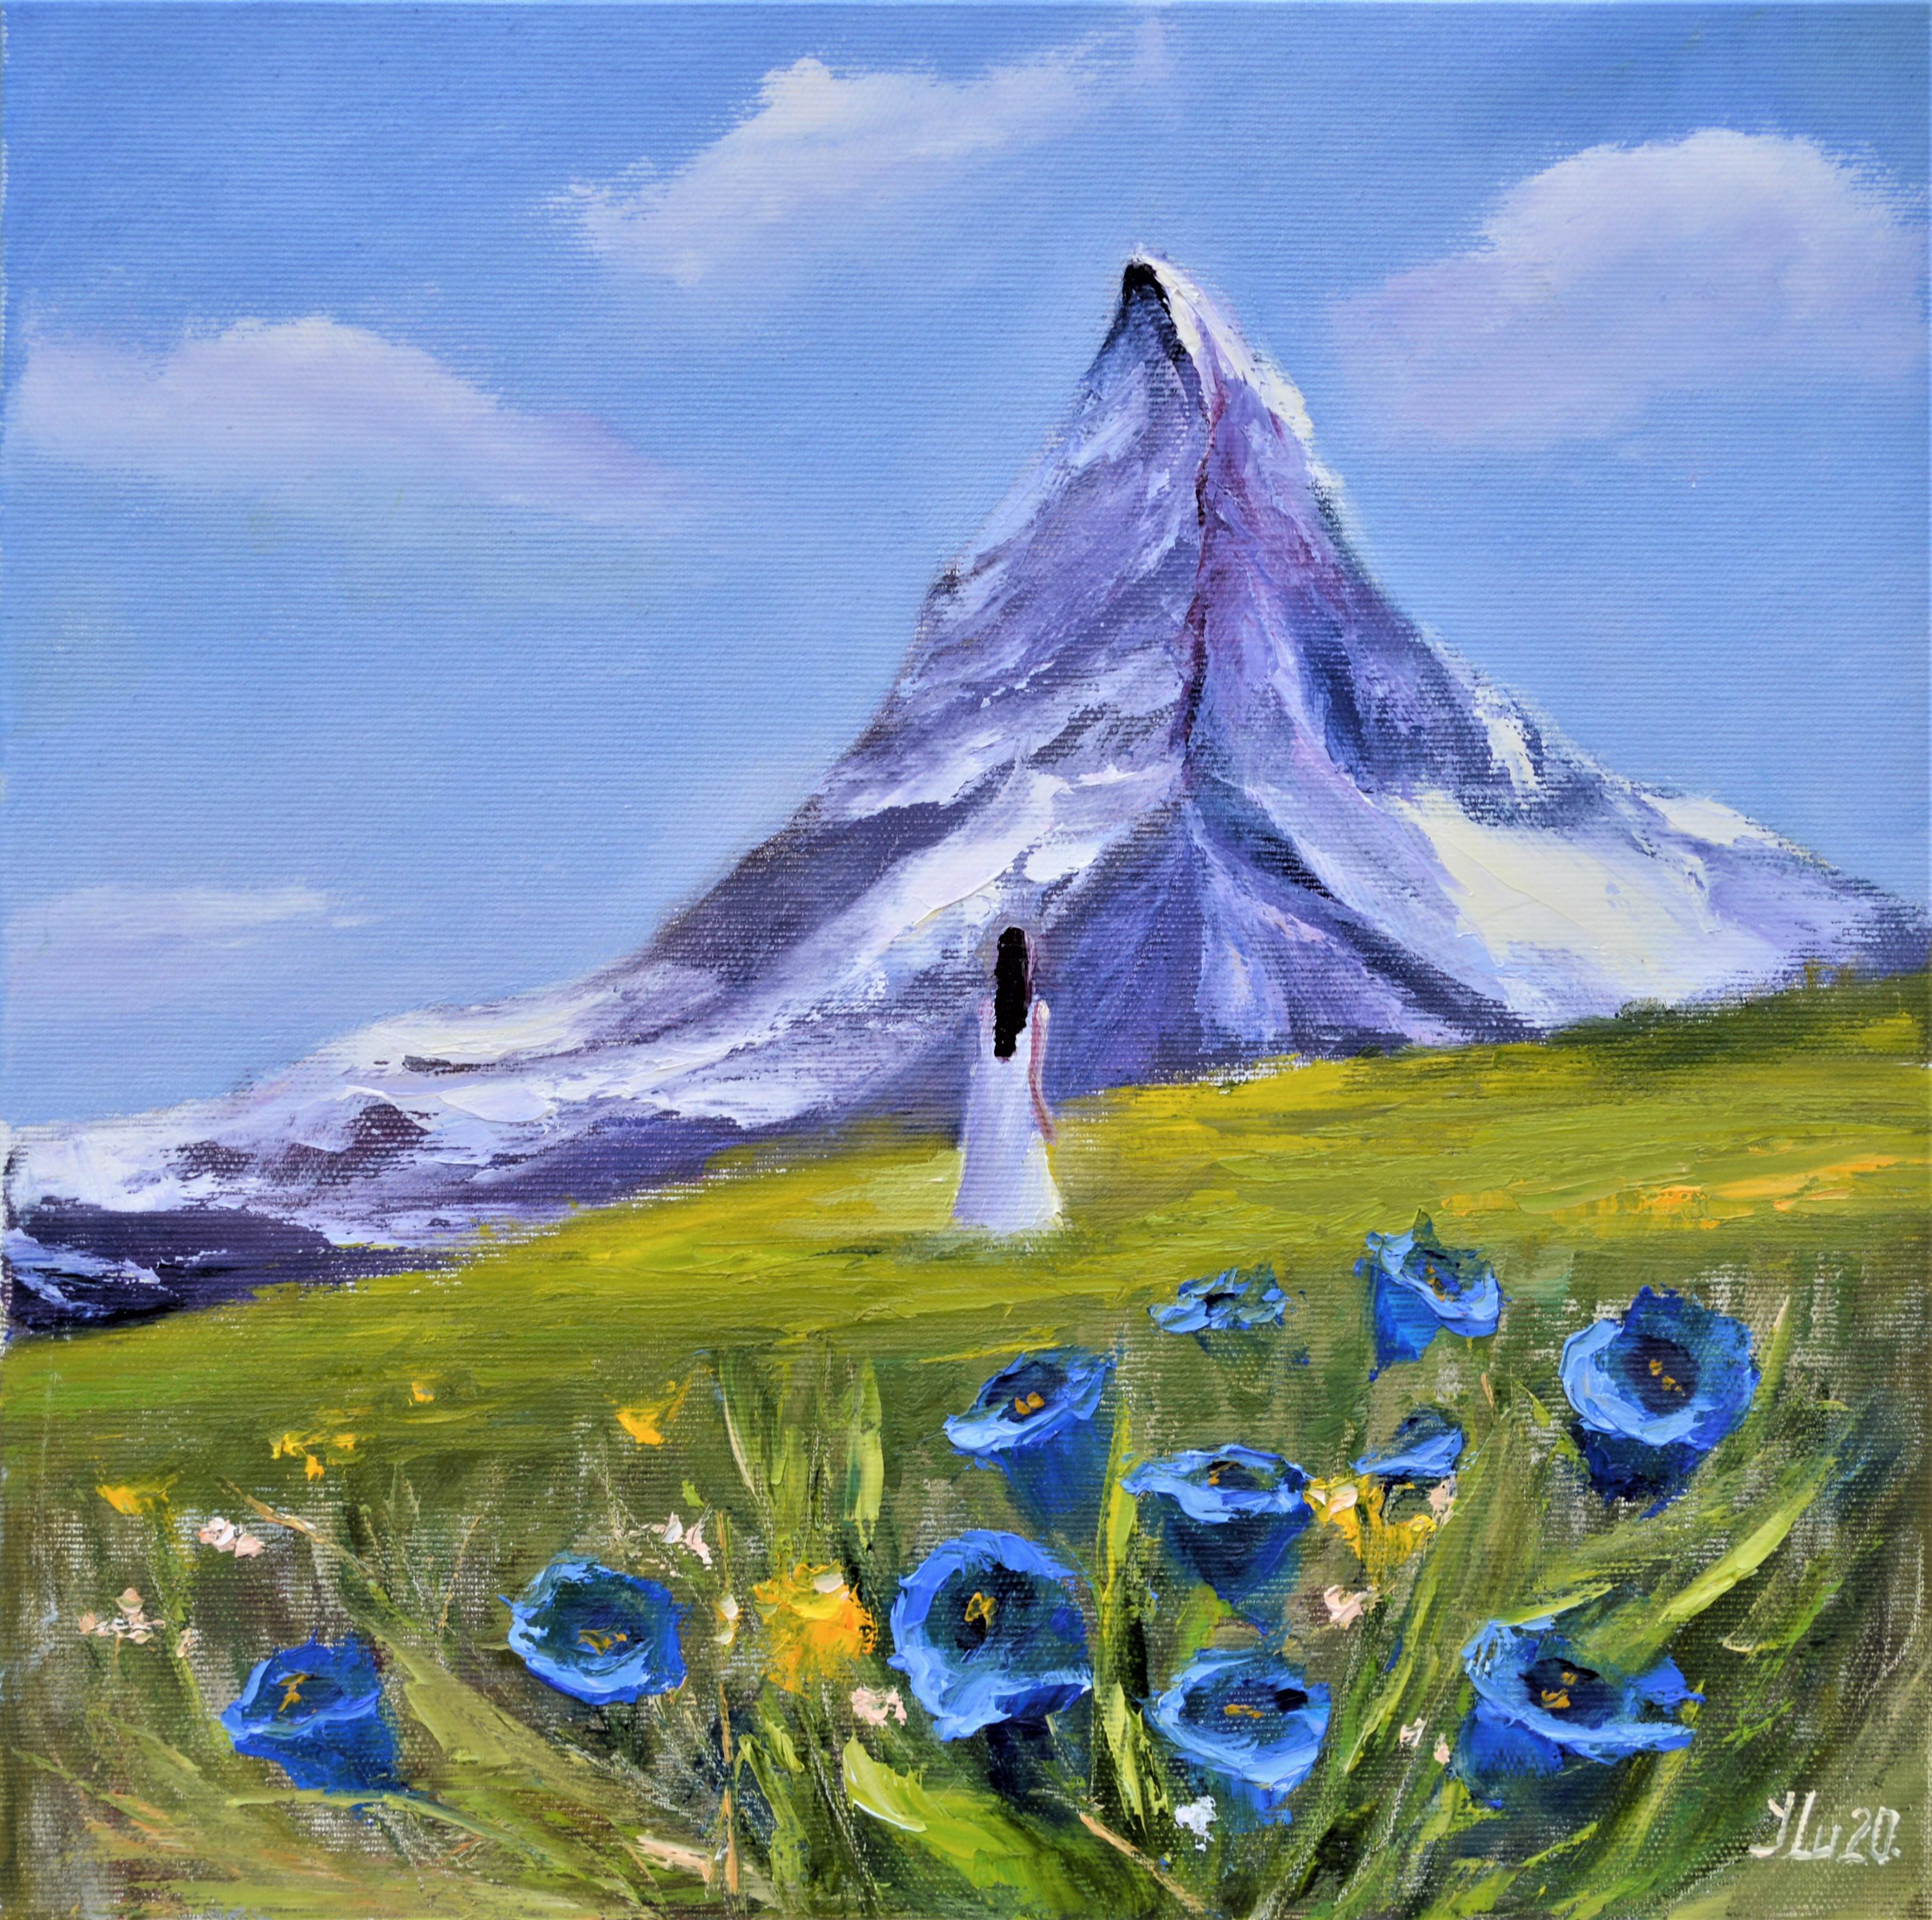 In this oil painting, I sought harmony with nature's grandeur, capturing the majestic mountain as a backdrop to the delicate dance of alpine flowers. Vivid blues and tranquil greens envelop the scene, offering a breath of serenity and a reminder of